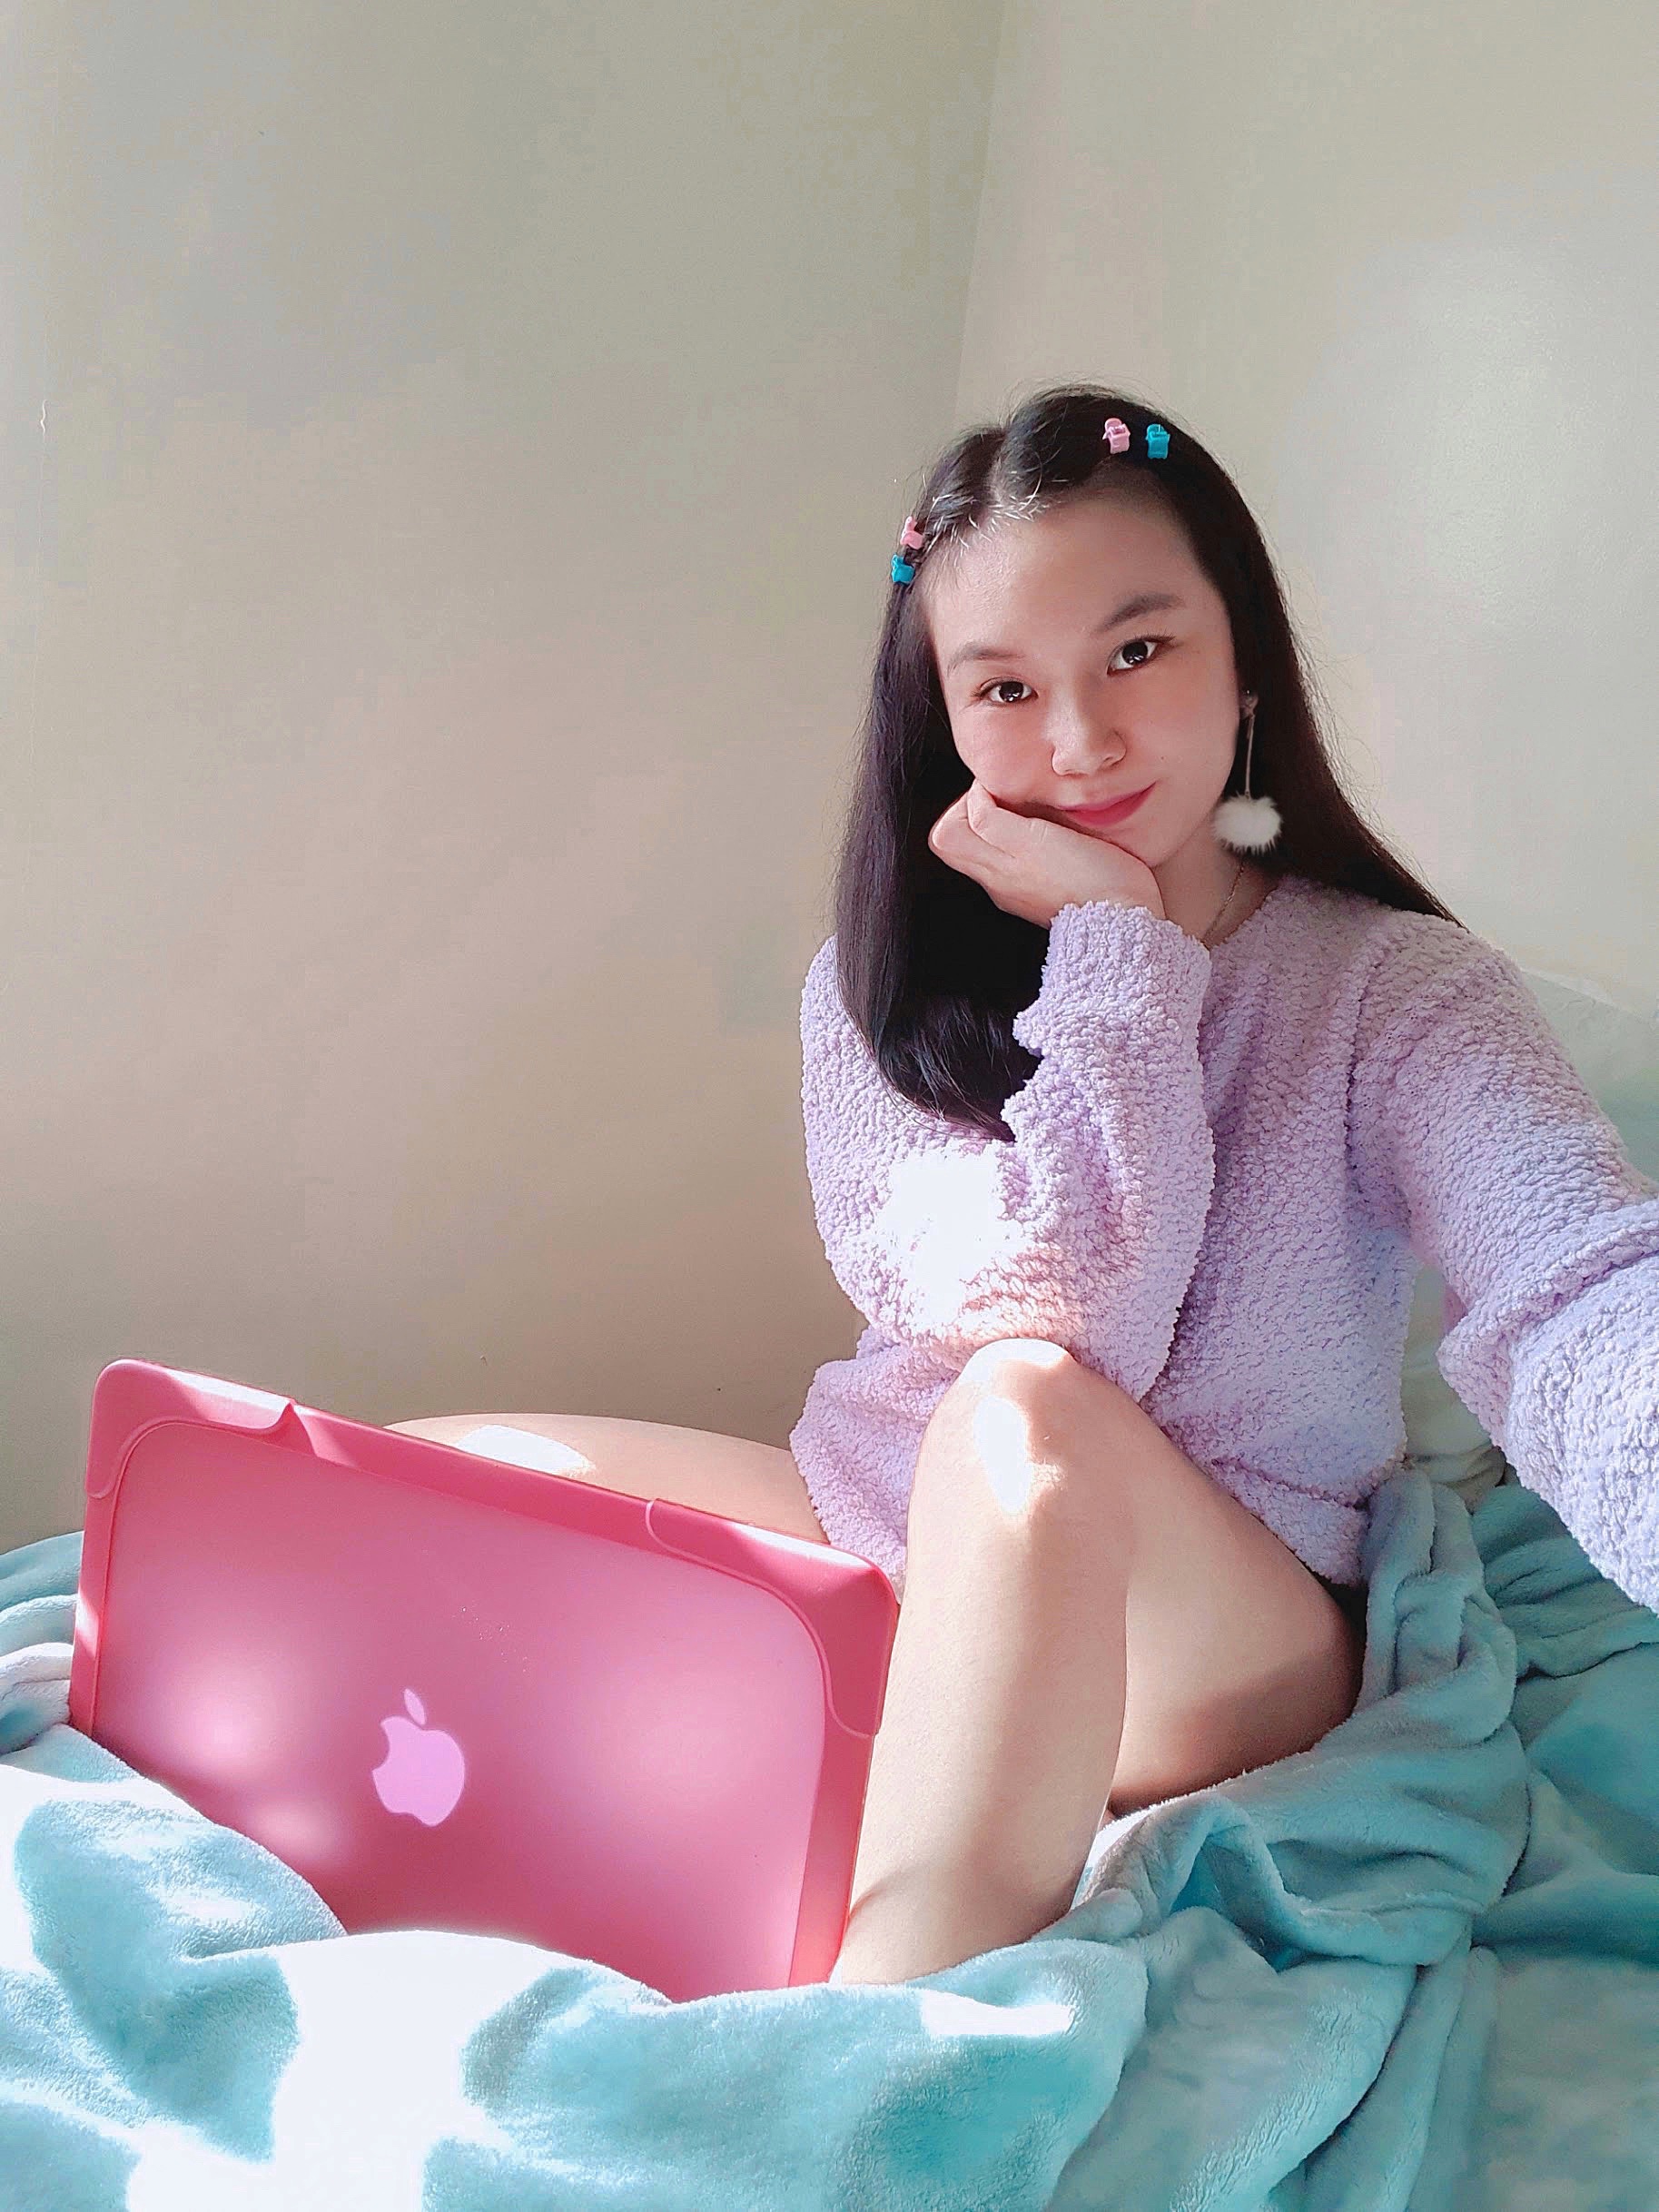 Roxanne Lacap at bed with a pink laptop